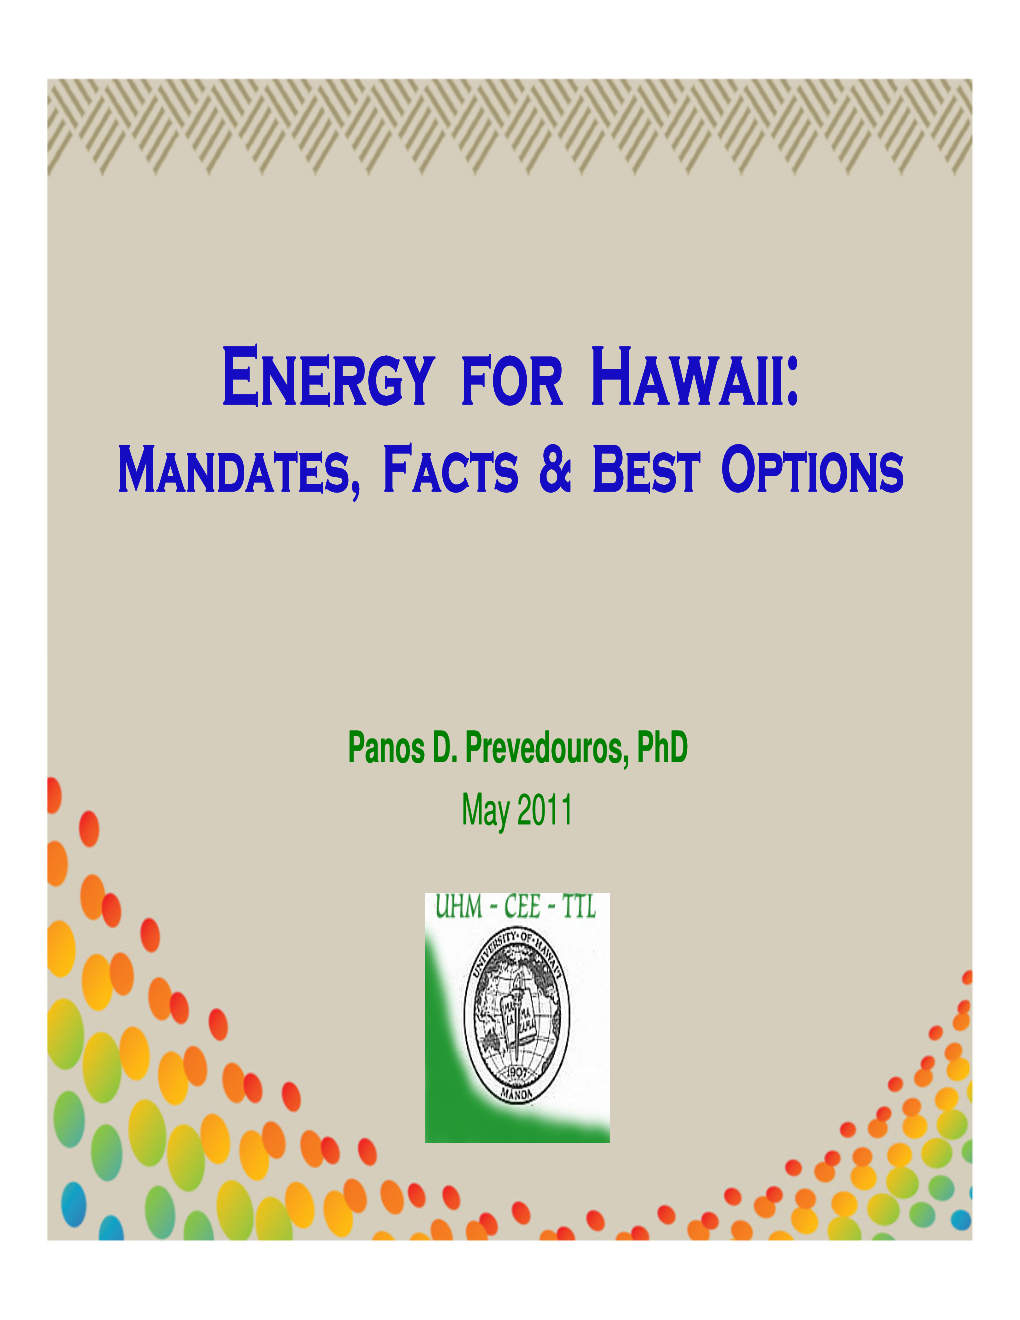 Energy for Hawaii: Mandates, Facts & Best Options